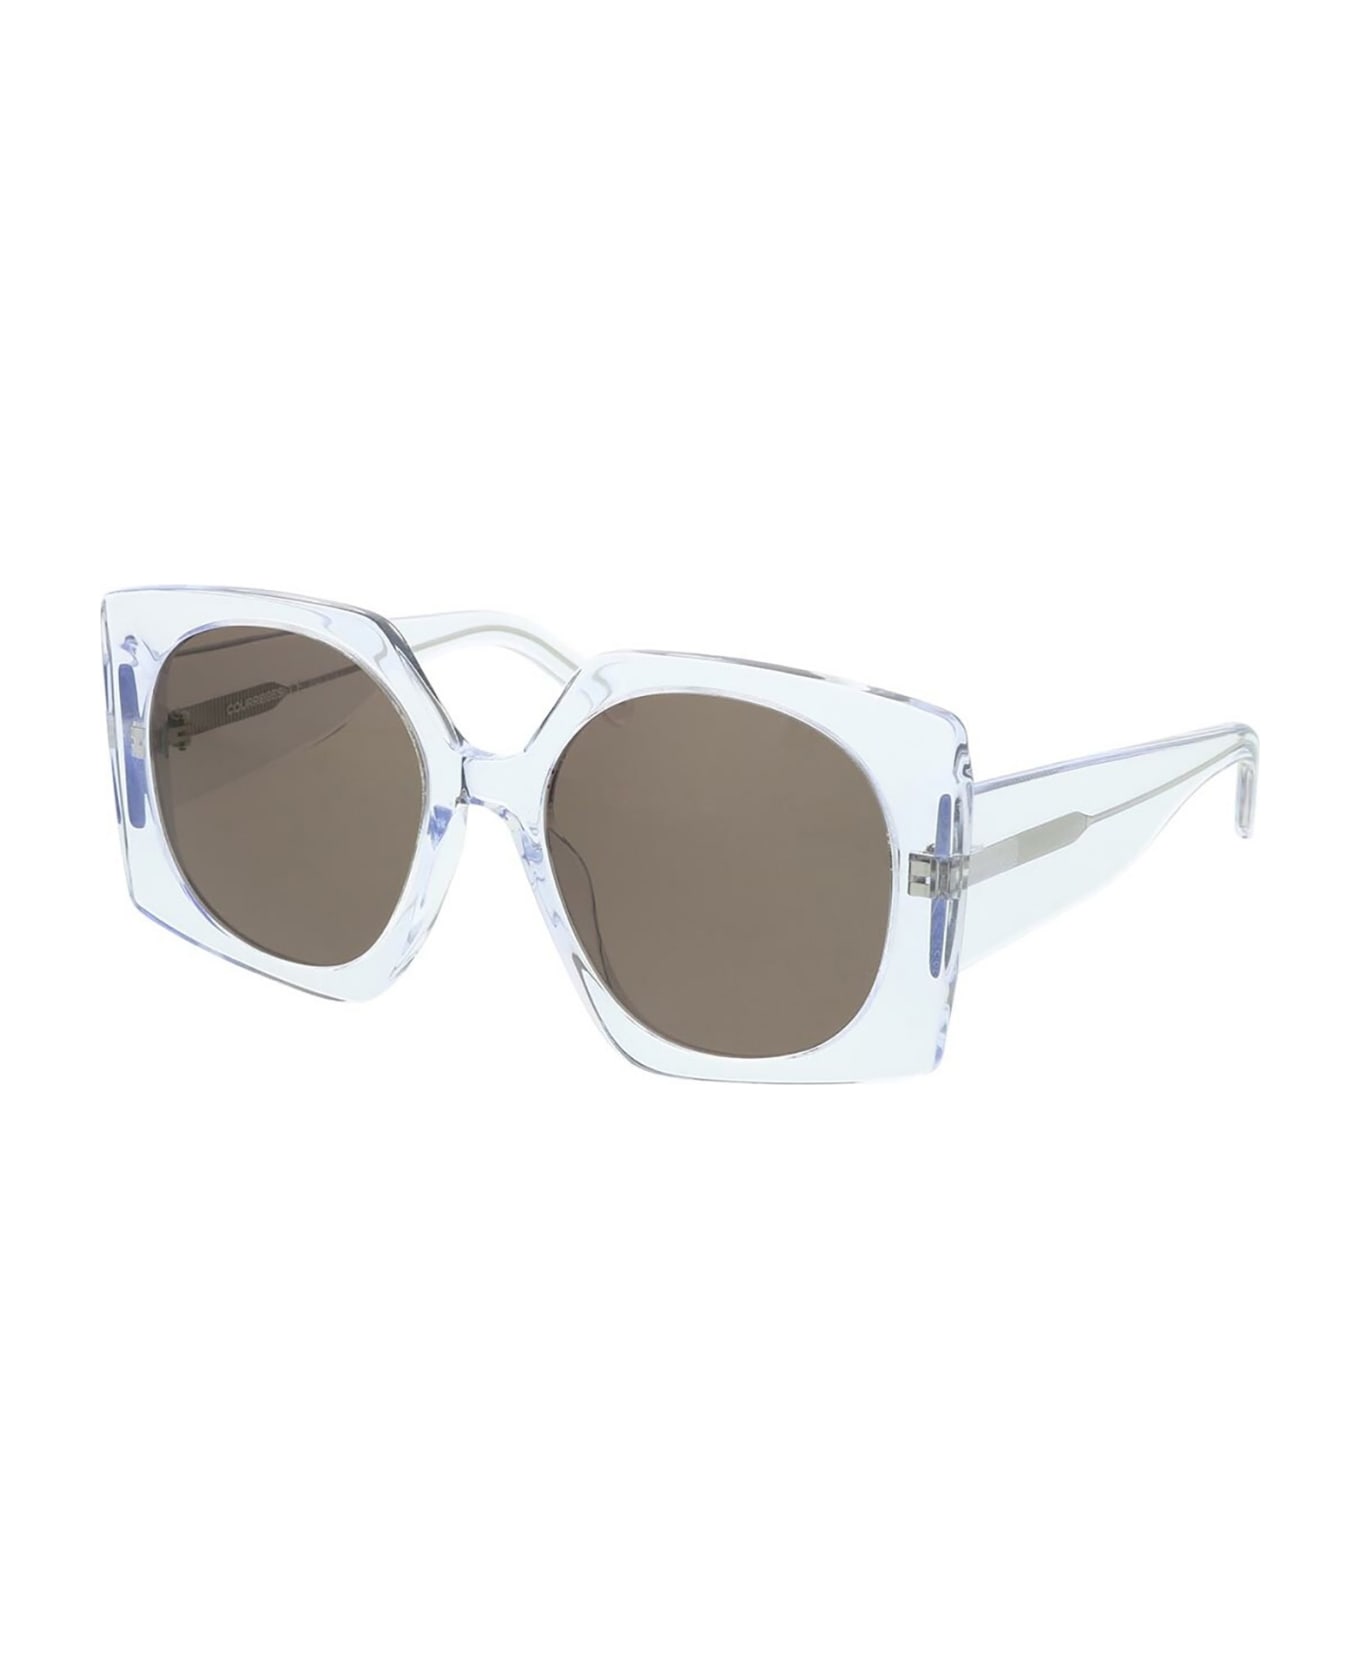 Courrèges CL1907 Sunglasses - Crystal Crystal Brown